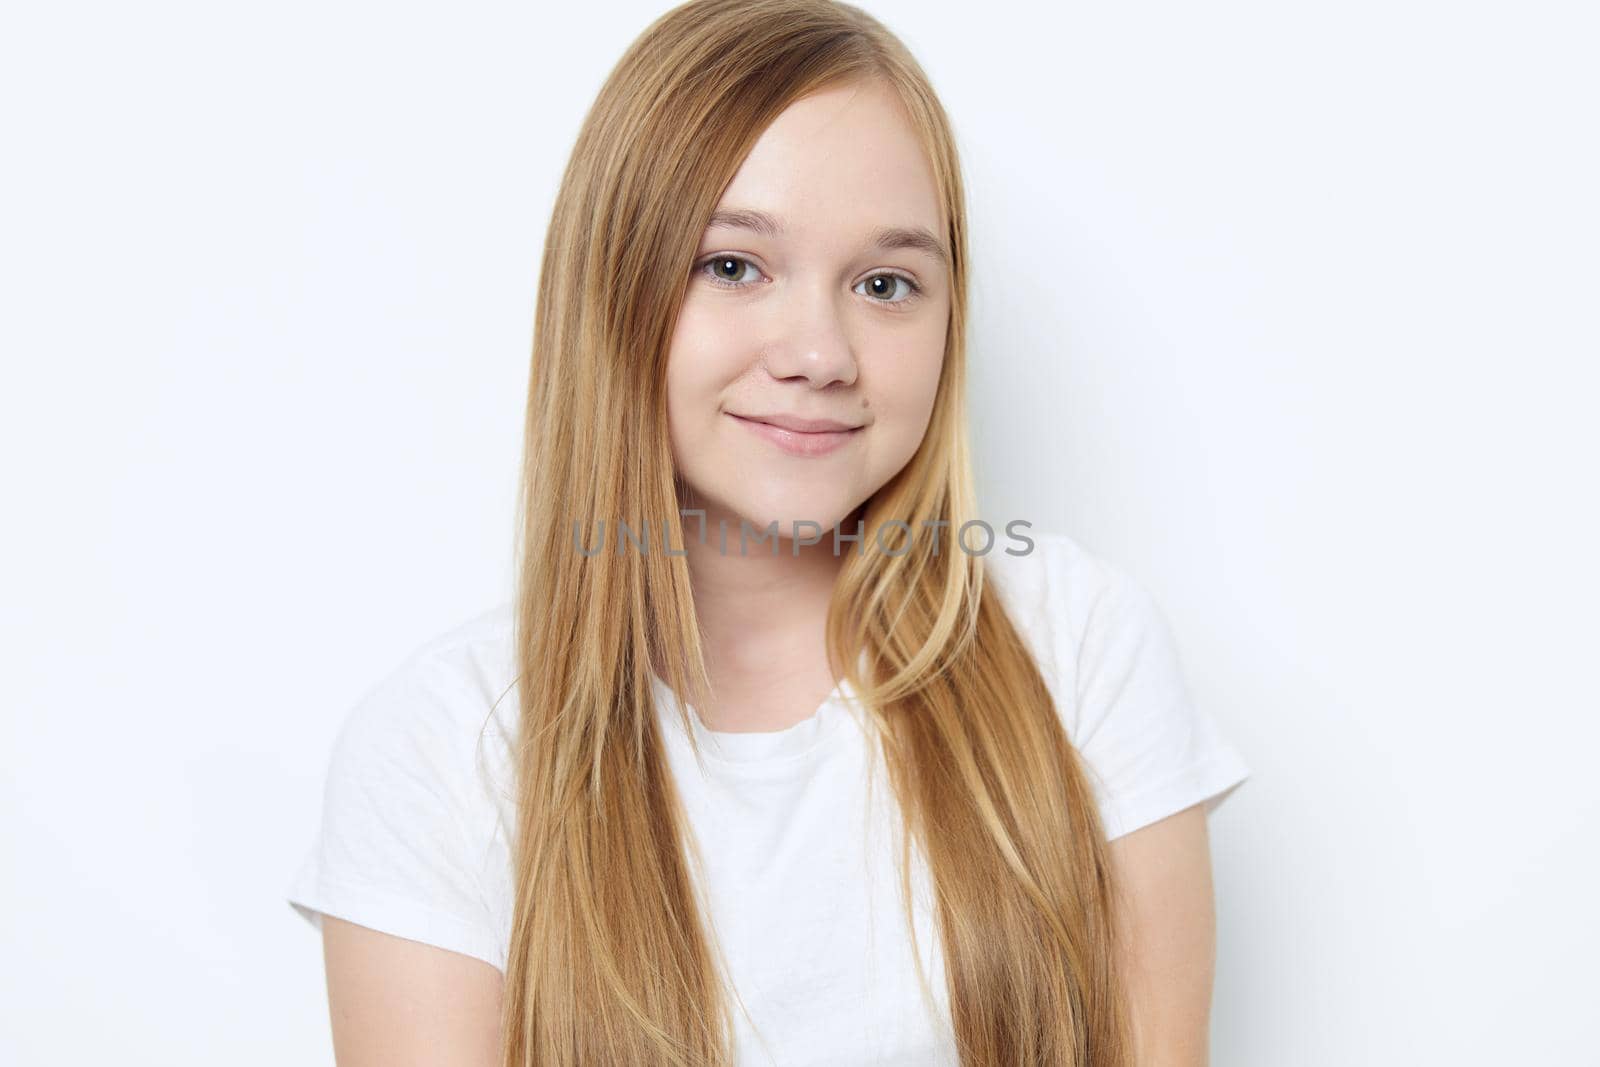 smiling girl blonde hair cropped view Studio isolated background. High quality photo